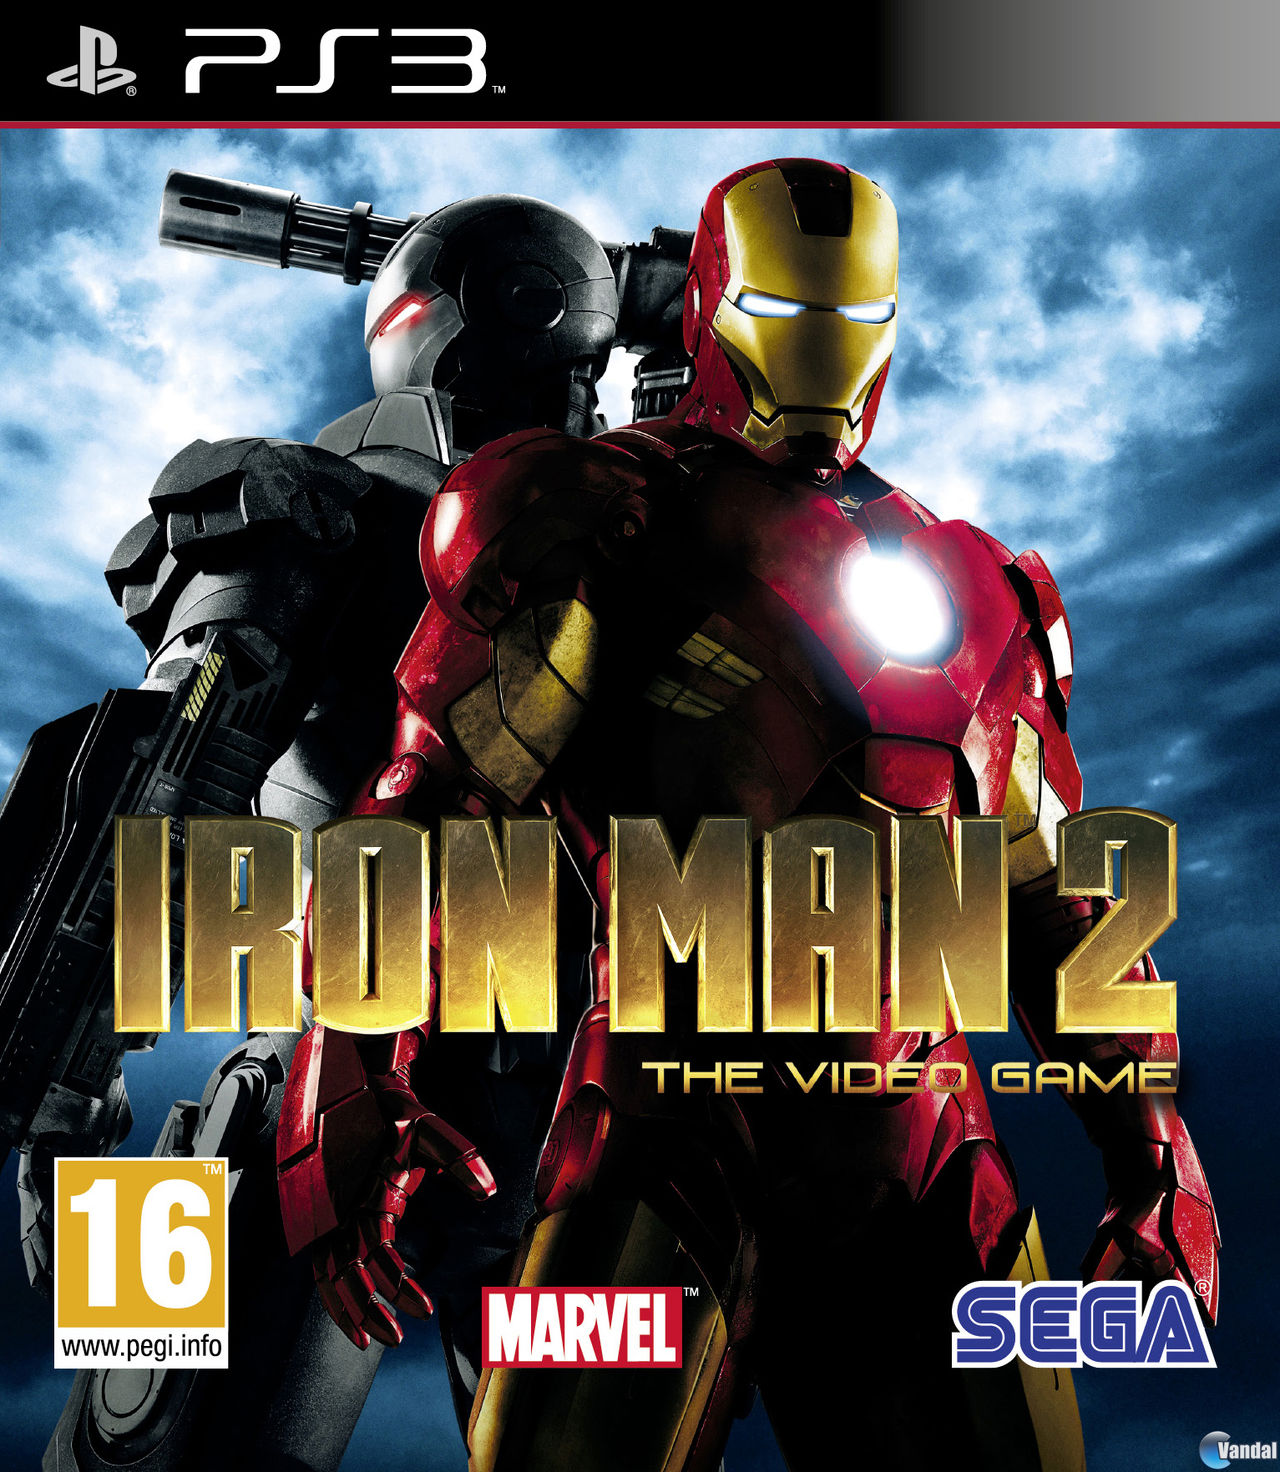 Detectar posibilidad verano Iron Man 2 - Videojuego (PS3, Xbox 360, Wii, PSP, NDS y iPhone) - Vandal